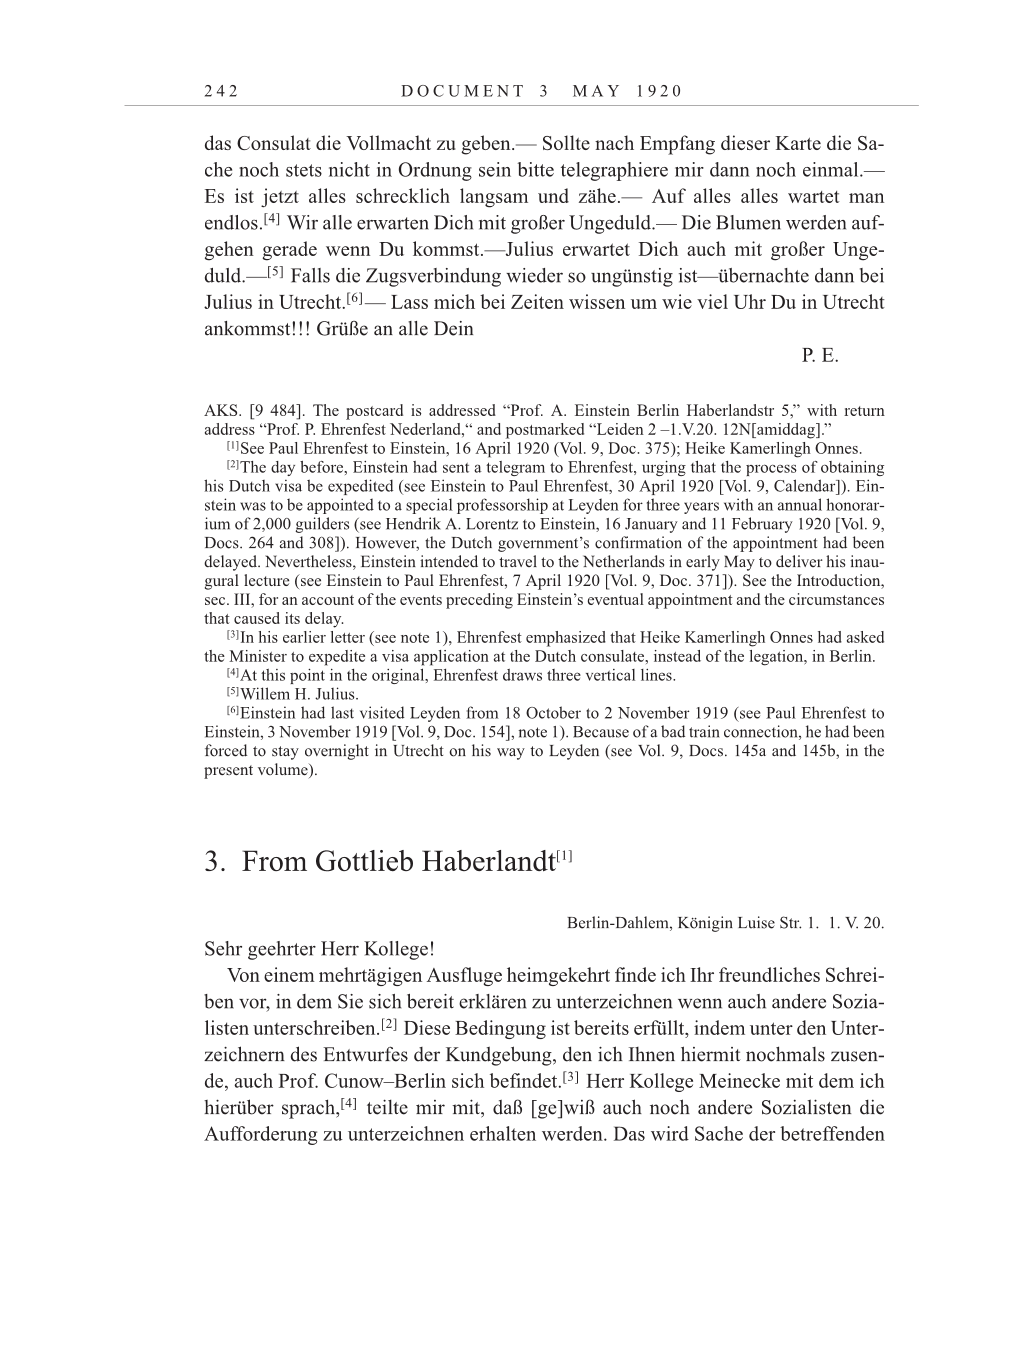 Volume 10: The Berlin Years: Correspondence May-December 1920 / Supplementary Correspondence 1909-1920 page 242